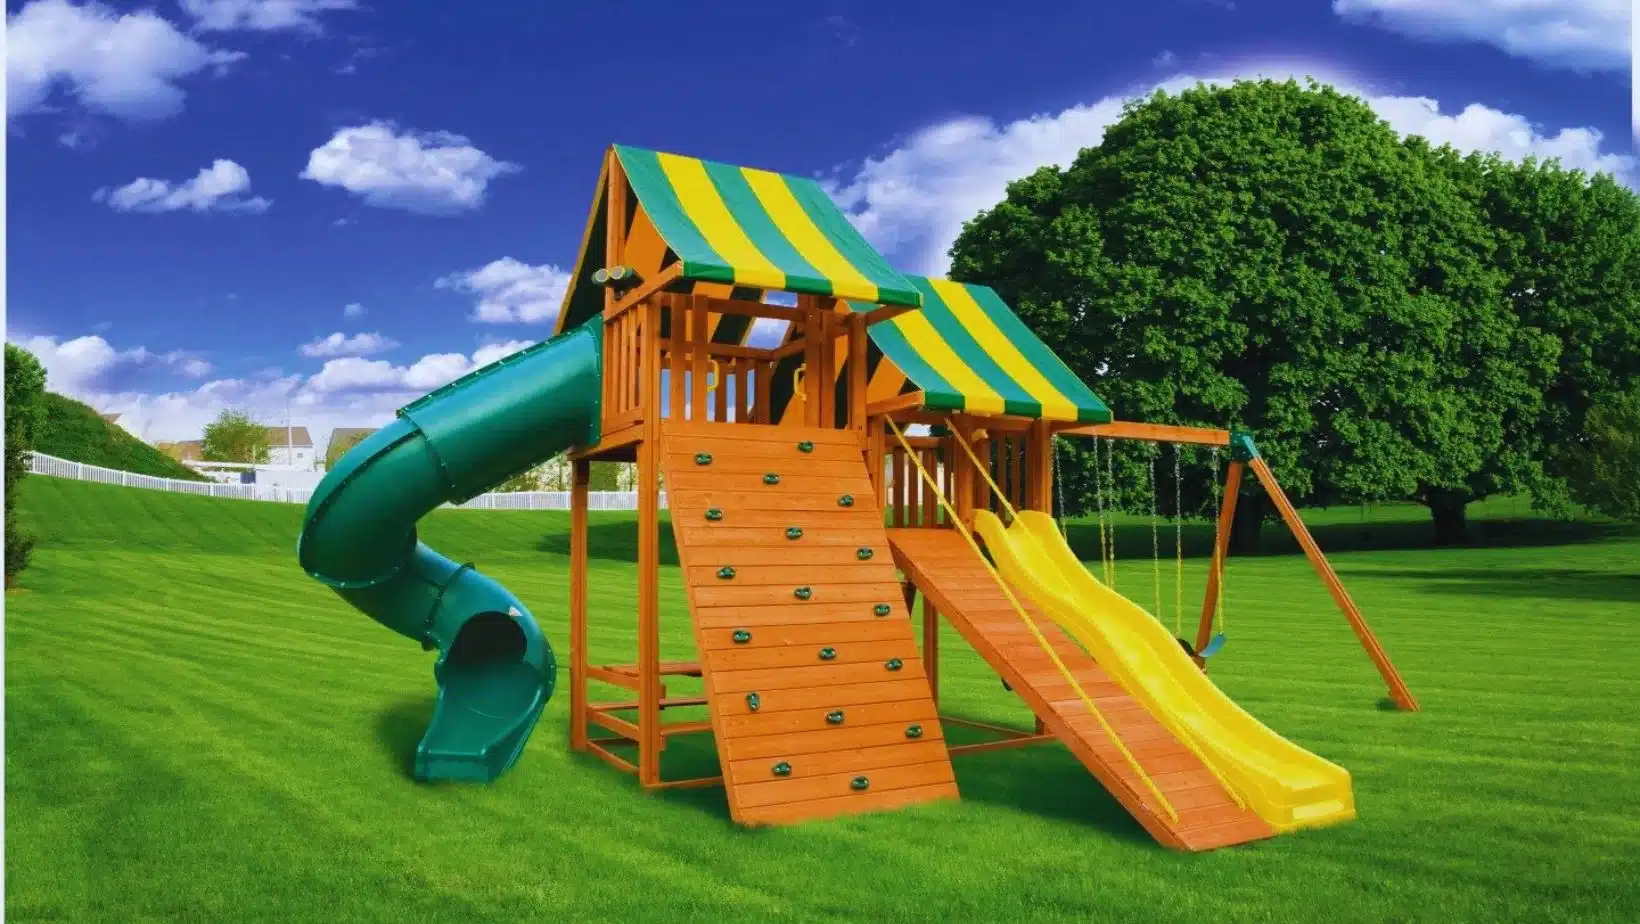 Our Backyard Playground & Tips For Buying A Used Playset